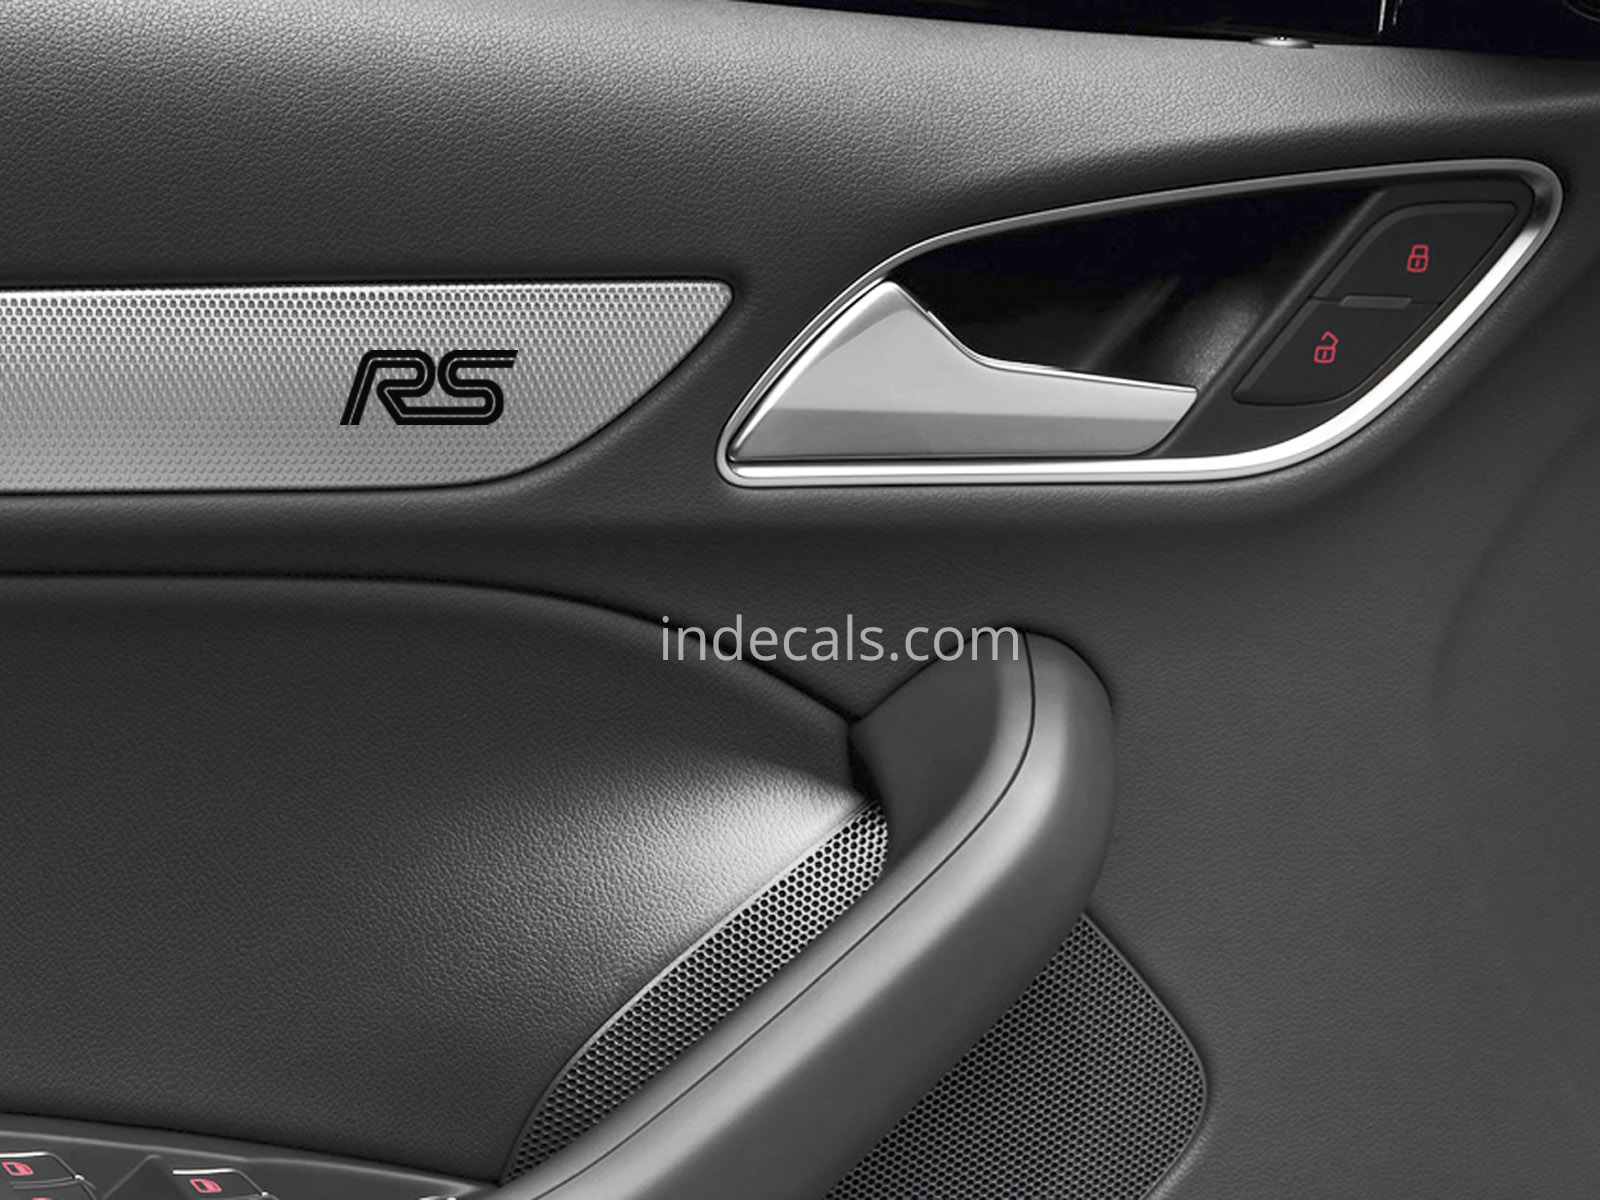 6 x Ford RS Stickers for Door Trim - Black